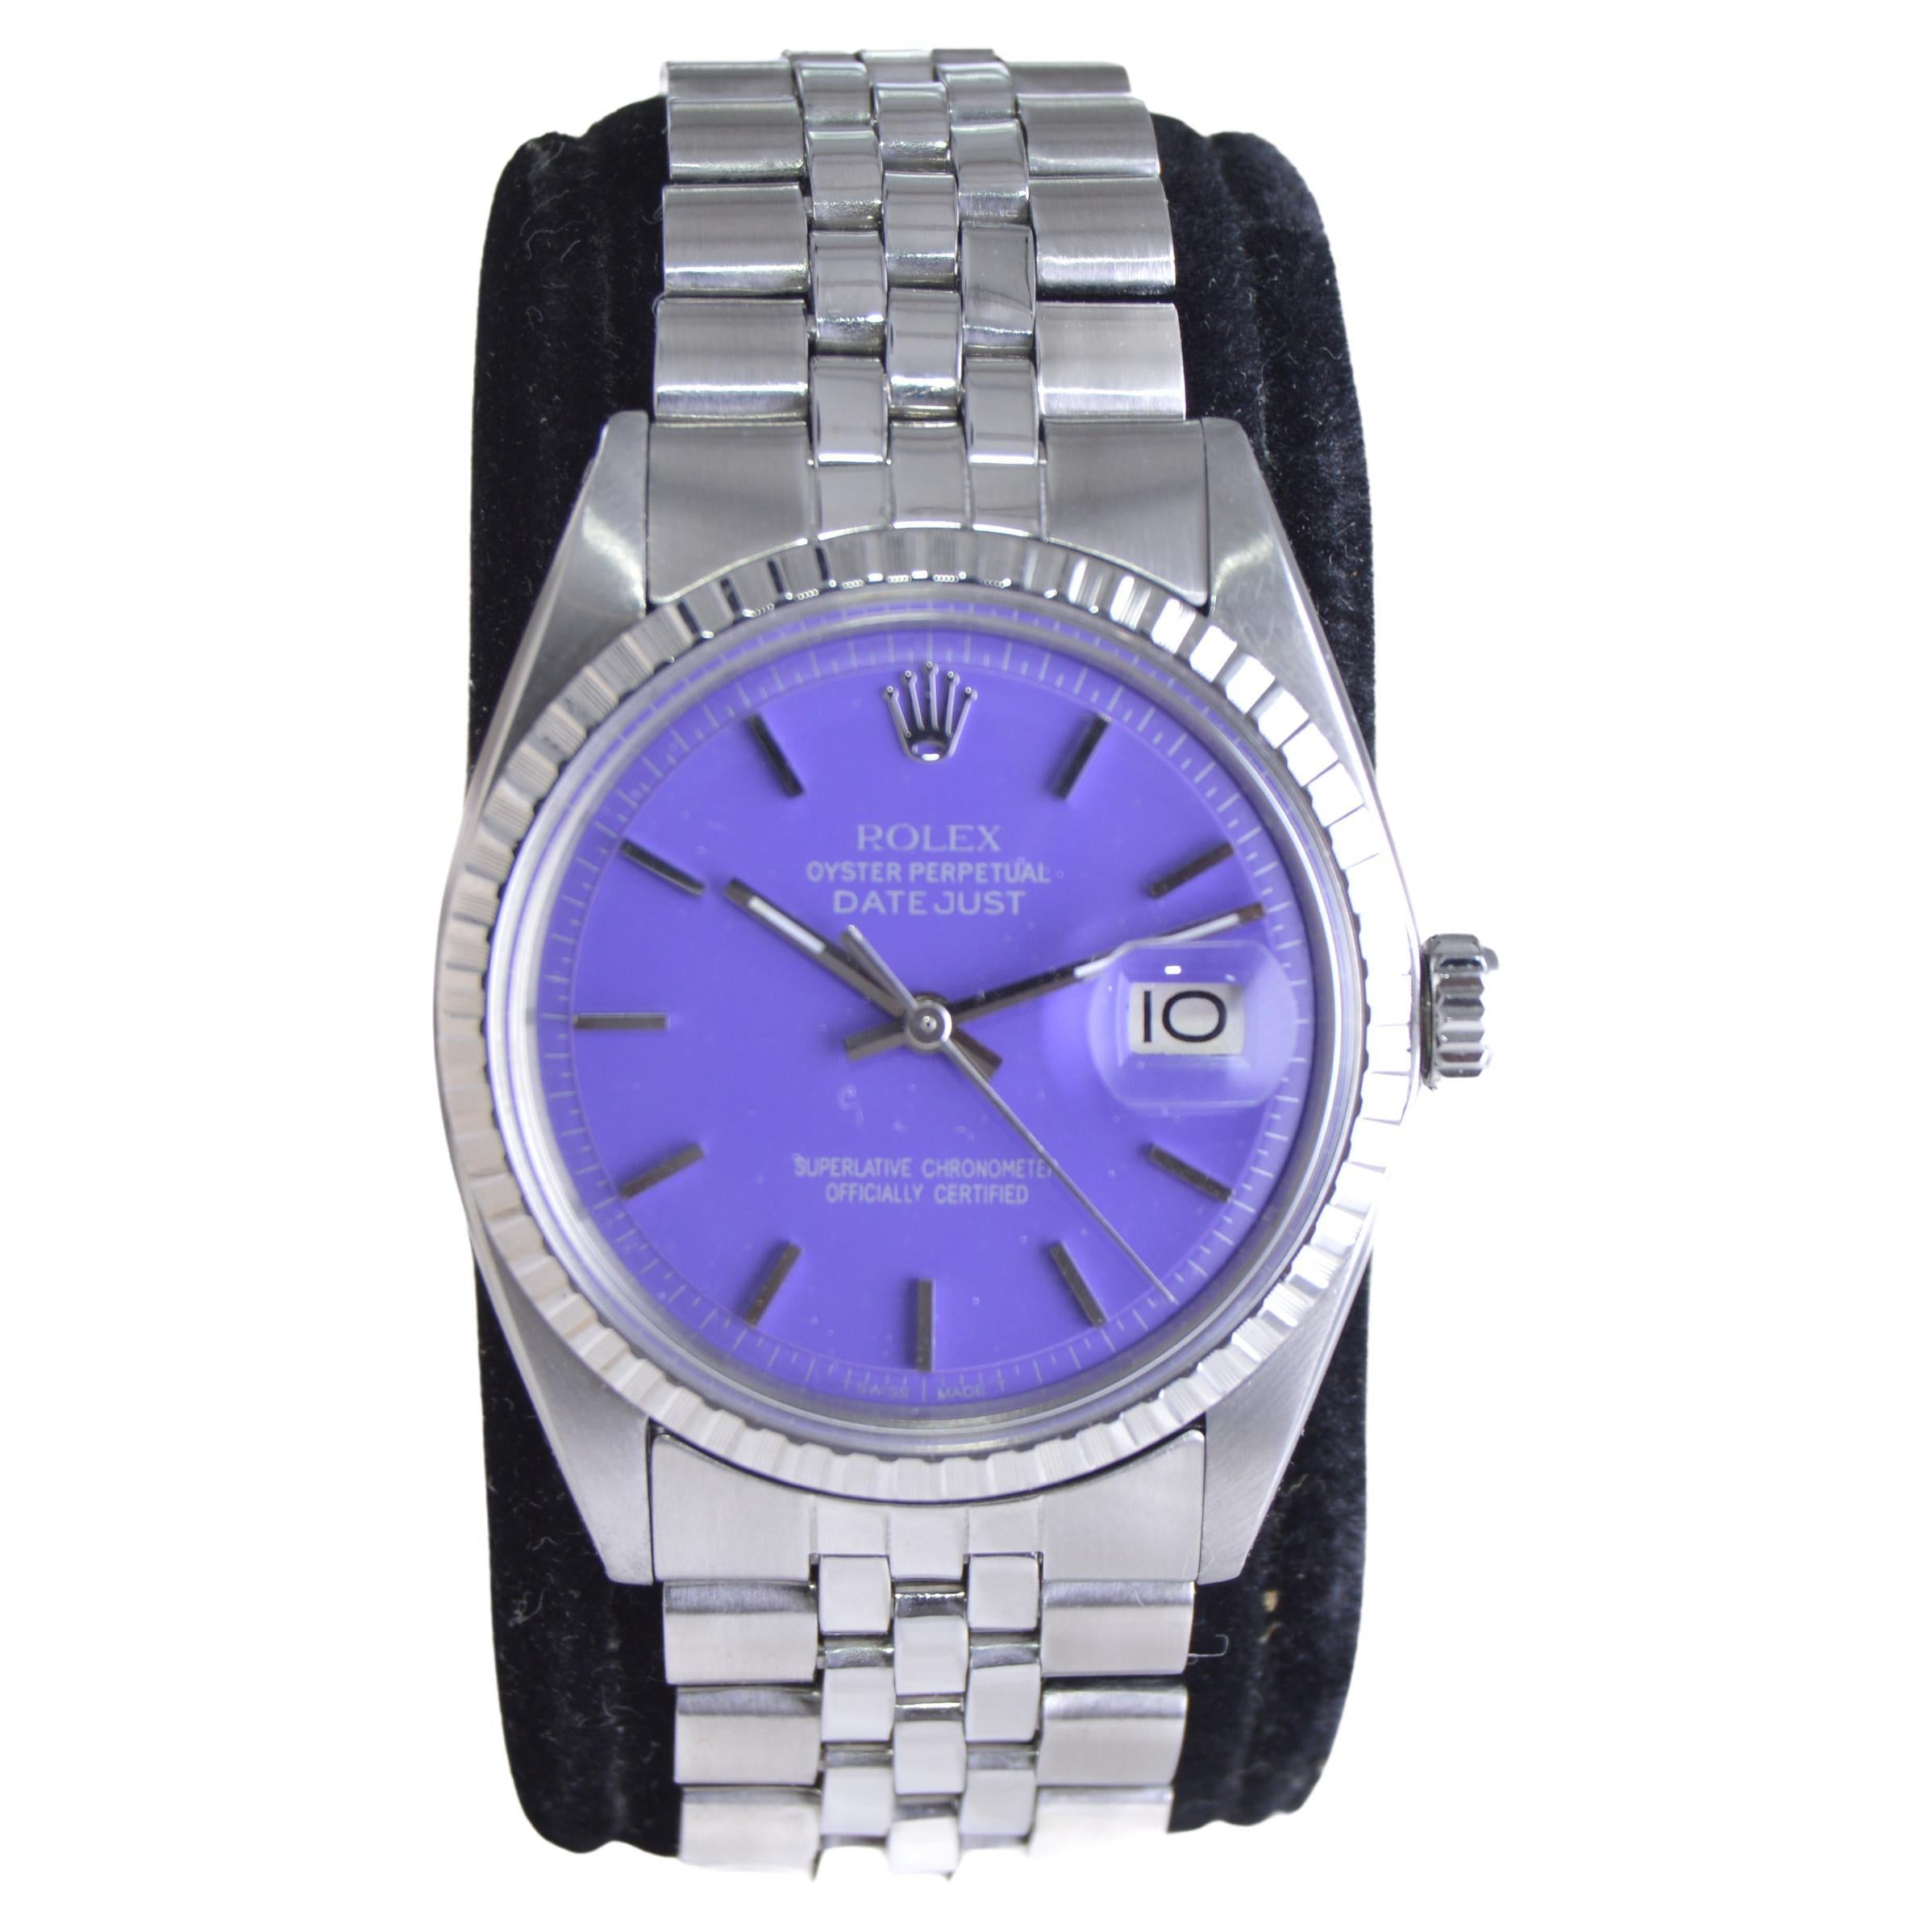 Rolex Steel Datejust with Custom Finished Purple Dial, 1970s